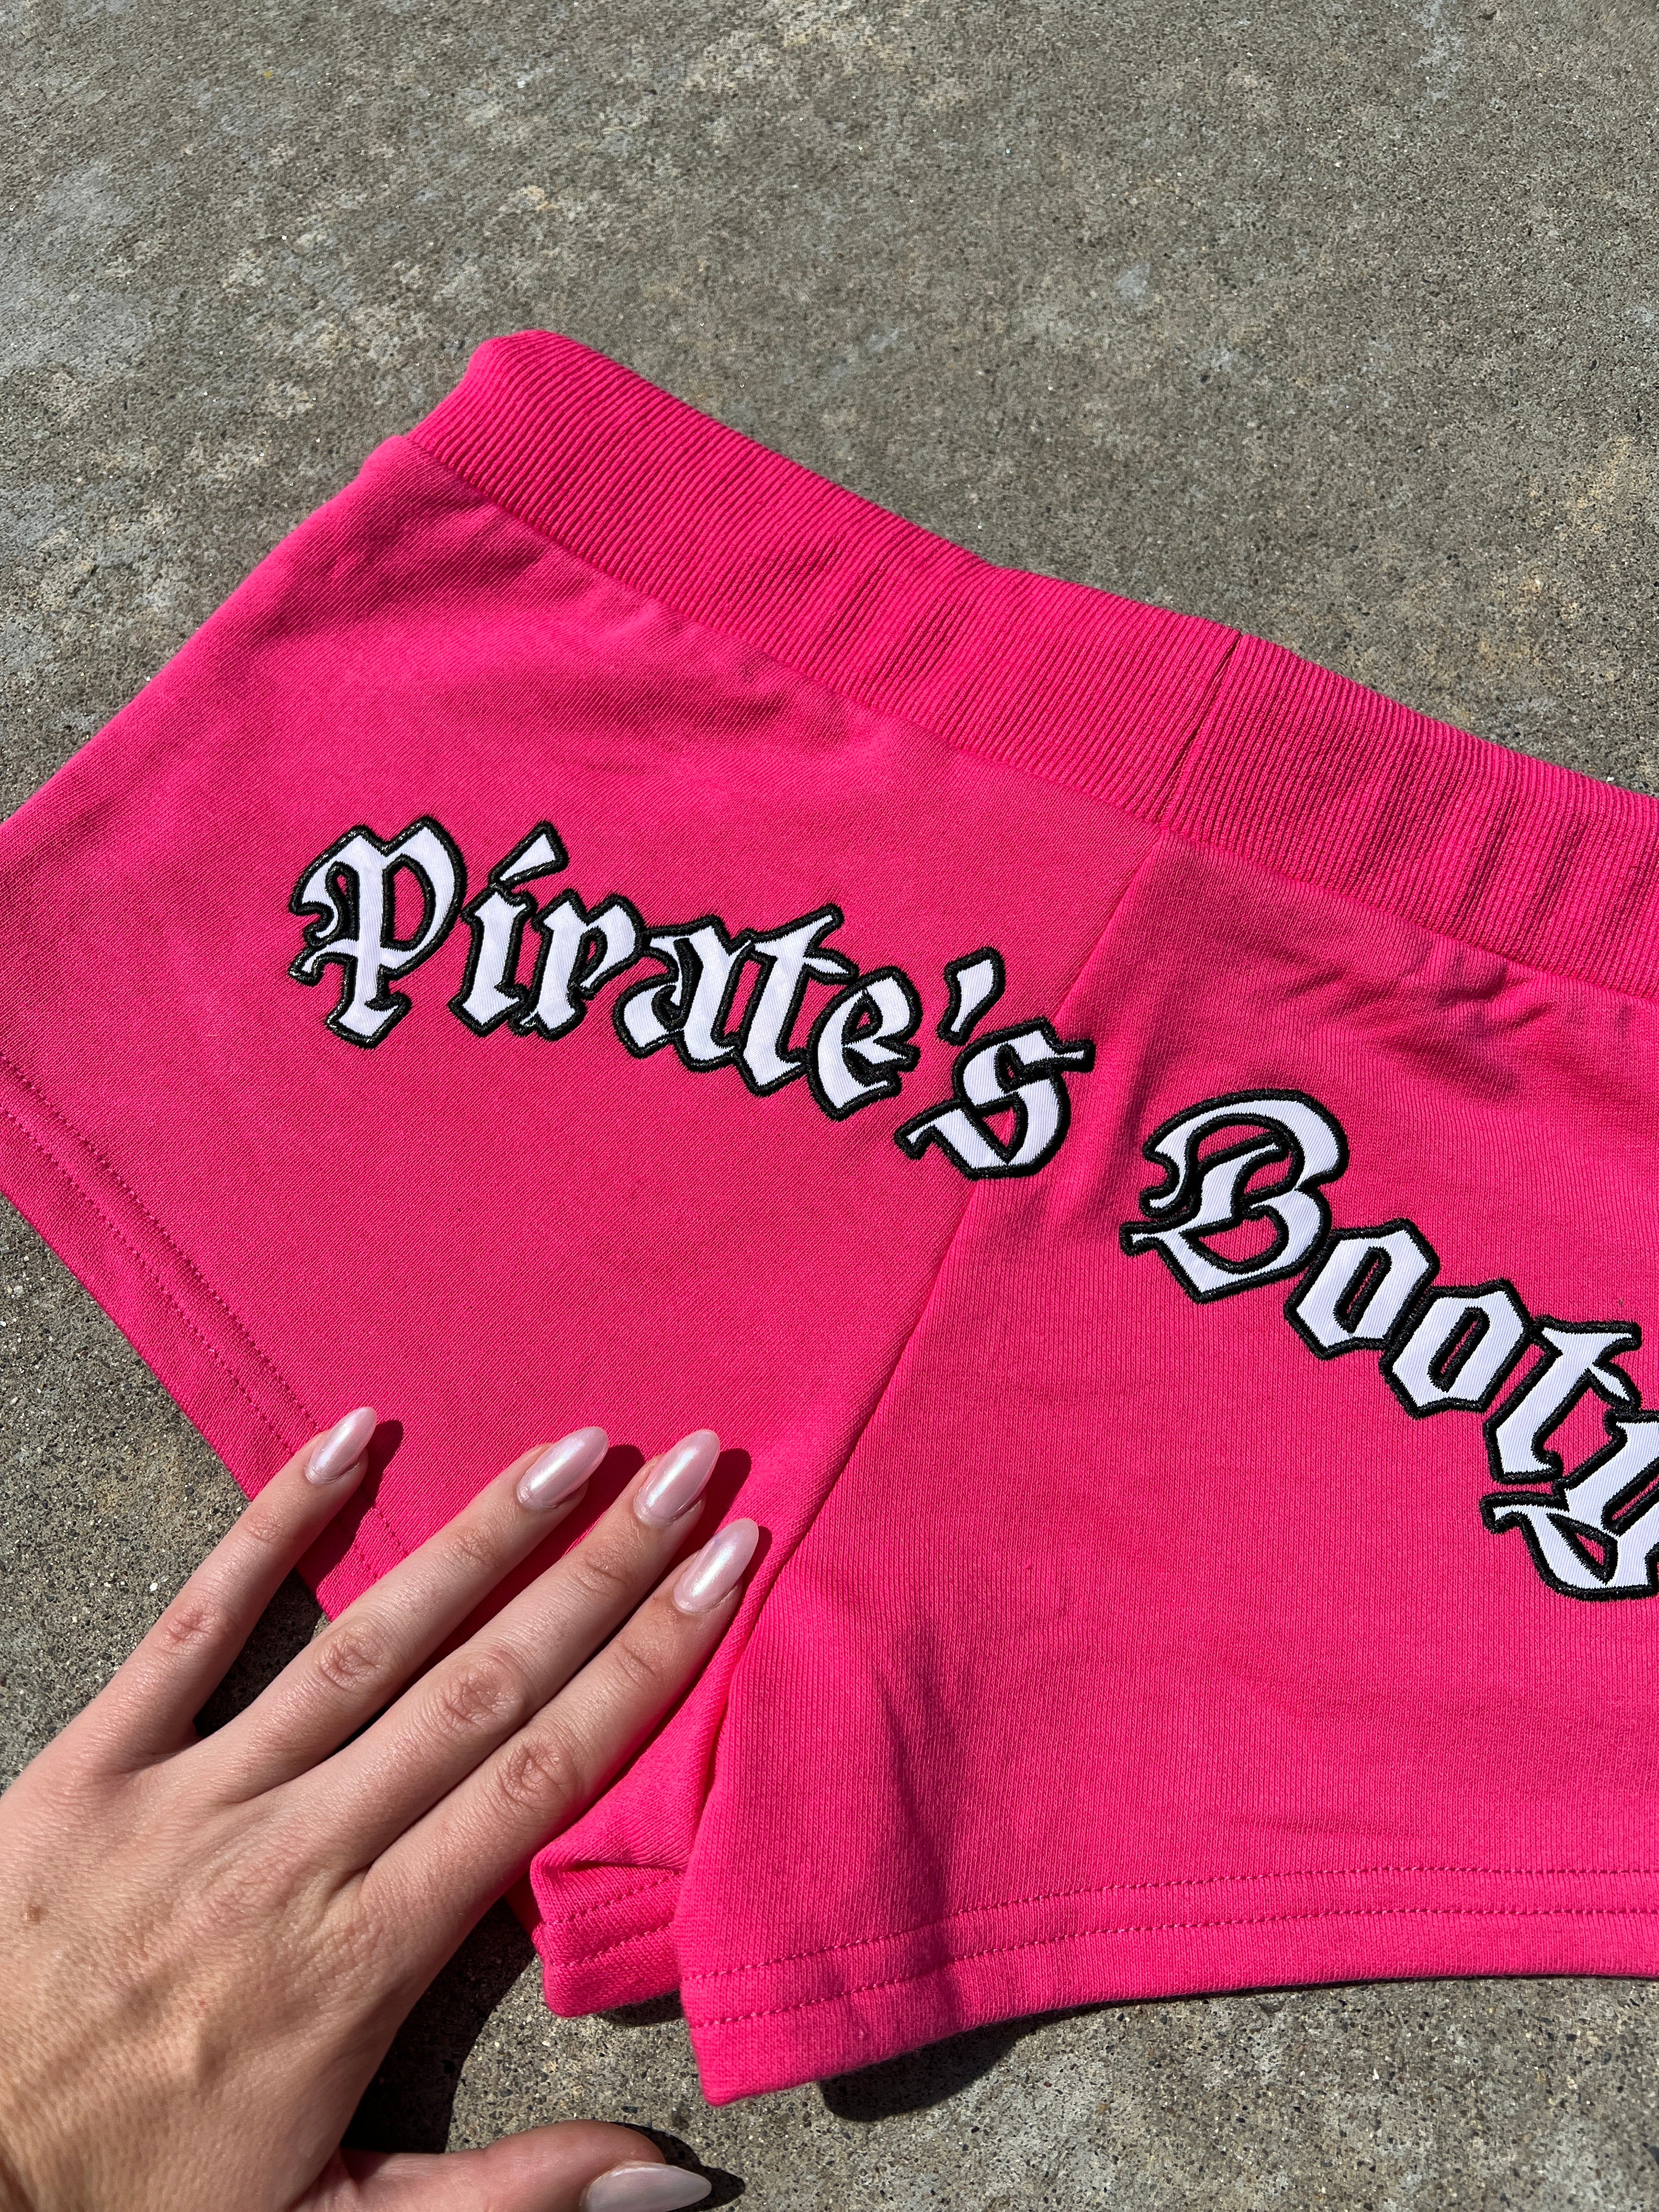 1 LEFT: pirate's booty shorts